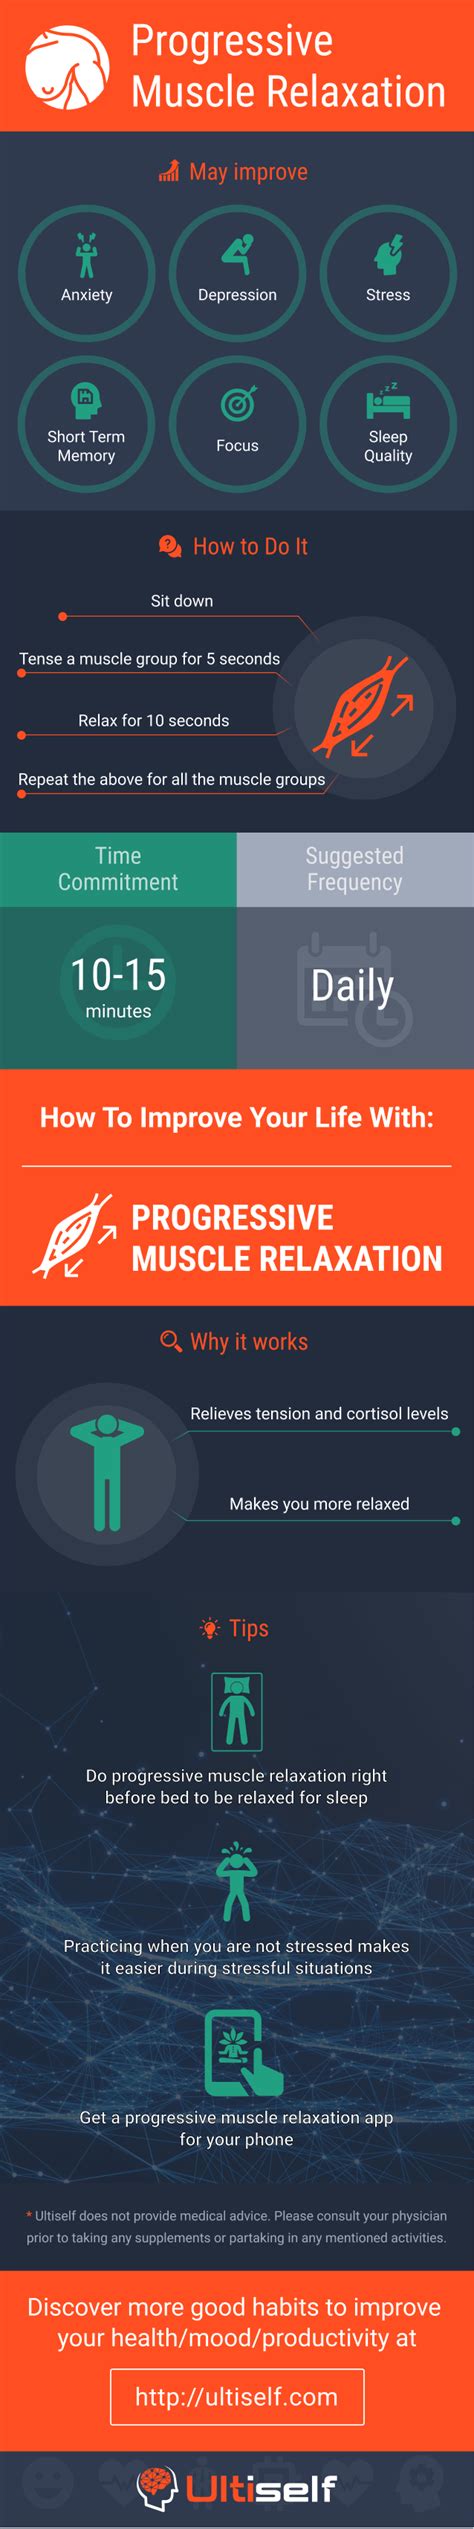 How Muscle Relaxation Can Improve Your Health Ultiself Habits